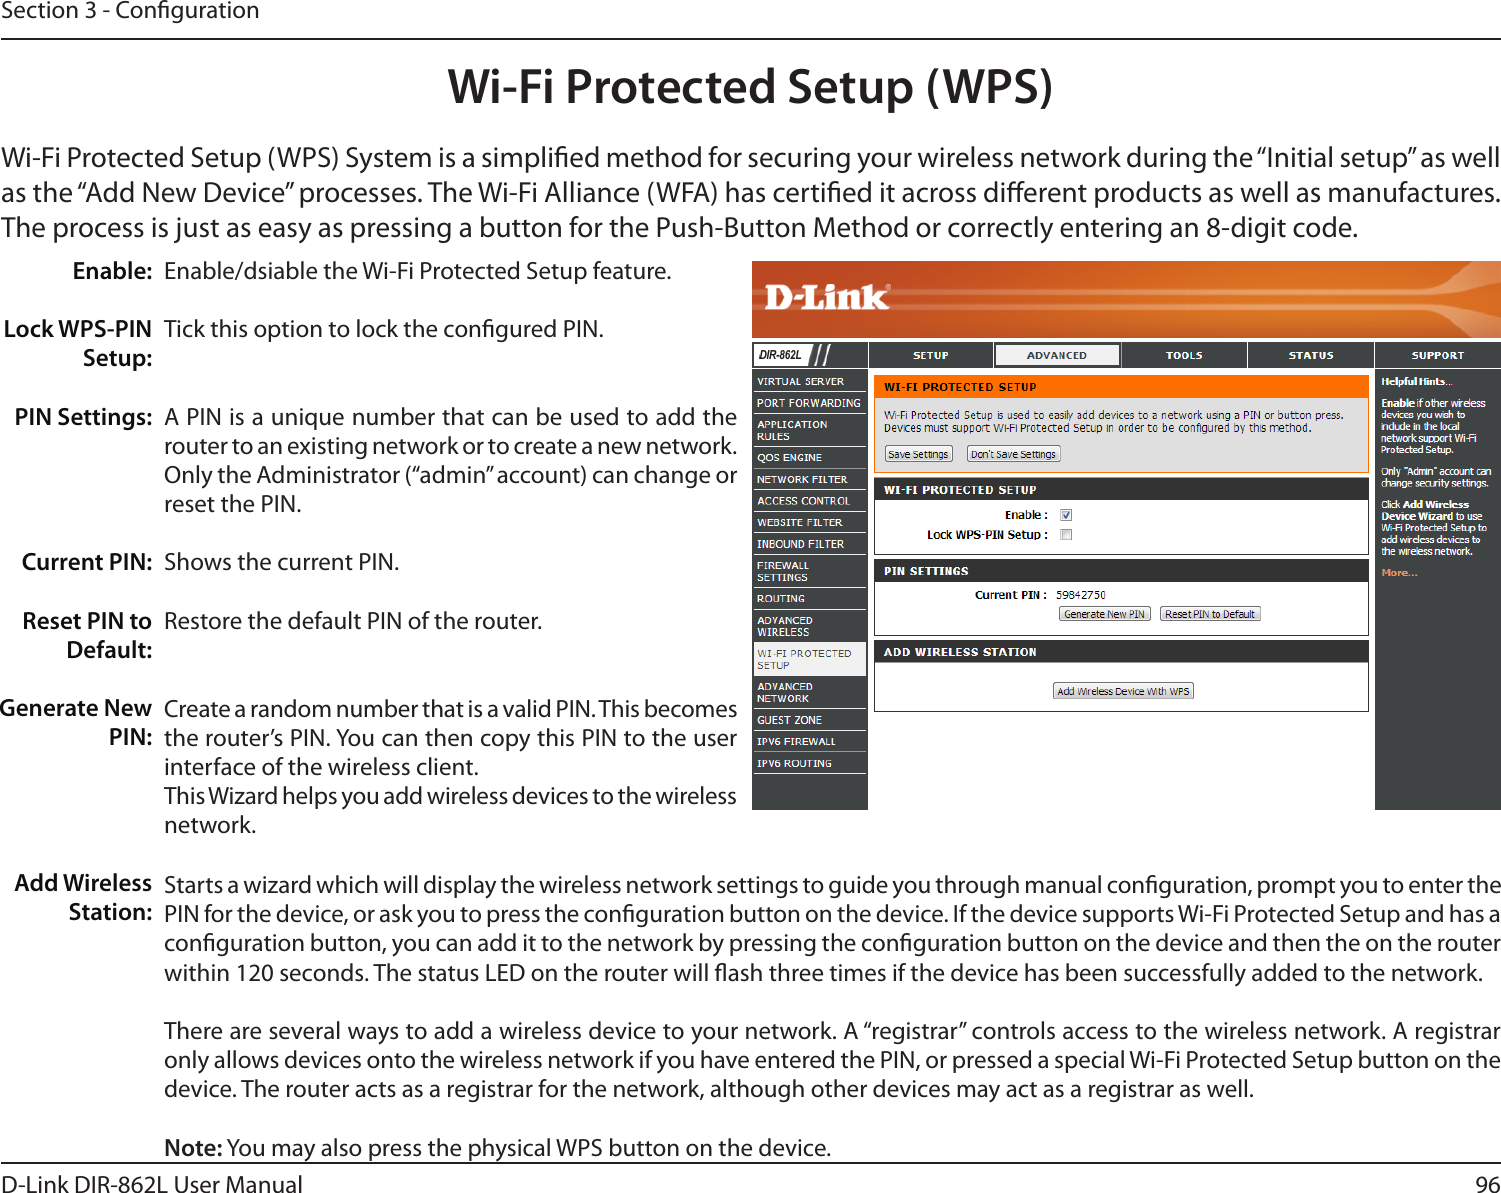 96D-Link DIR-862L User ManualSection 3 - CongurationWi-Fi Protected Setup (WPS)Enable/dsiable the Wi-Fi Protected Setup feature. Tick this option to lock the congured PIN.A PIN is a unique number that can be used to add the router to an existing network or to create a new network. Only the Administrator (“admin” account) can change or reset the PIN. Shows the current PIN. Restore the default PIN of the router. Create a random number that is a valid PIN. This becomes the router’s PIN. You can then copy this PIN to the user interface of the wireless client.This Wizard helps you add wireless devices to the wireless network.Enable:Lock WPS-PIN Setup:PIN Settings:Current PIN:Reset PIN to Default:Generate New PIN:Add Wireless Station:Wi-Fi Protected Setup (WPS) System is a simplied method for securing your wireless network during the “Initial setup” as well as the “Add New Device” processes. The Wi-Fi Alliance (WFA) has certied it across dierent products as well as manufactures. The process is just as easy as pressing a button for the Push-Button Method or correctly entering an 8-digit code.DIR-862LStarts a wizard which will display the wireless network settings to guide you through manual conguration, prompt you to enter the PIN for the device, or ask you to press the conguration button on the device. If the device supports Wi-Fi Protected Setup and has a conguration button, you can add it to the network by pressing the conguration button on the device and then the on the router within 120 seconds. The status LED on the router will ash three times if the device has been successfully added to the network.There are several ways to add a wireless device to your network. A “registrar” controls access to the wireless network. A registrar only allows devices onto the wireless network if you have entered the PIN, or pressed a special Wi-Fi Protected Setup button on the device. The router acts as a registrar for the network, although other devices may act as a registrar as well.Note: You may also press the physical WPS button on the device.